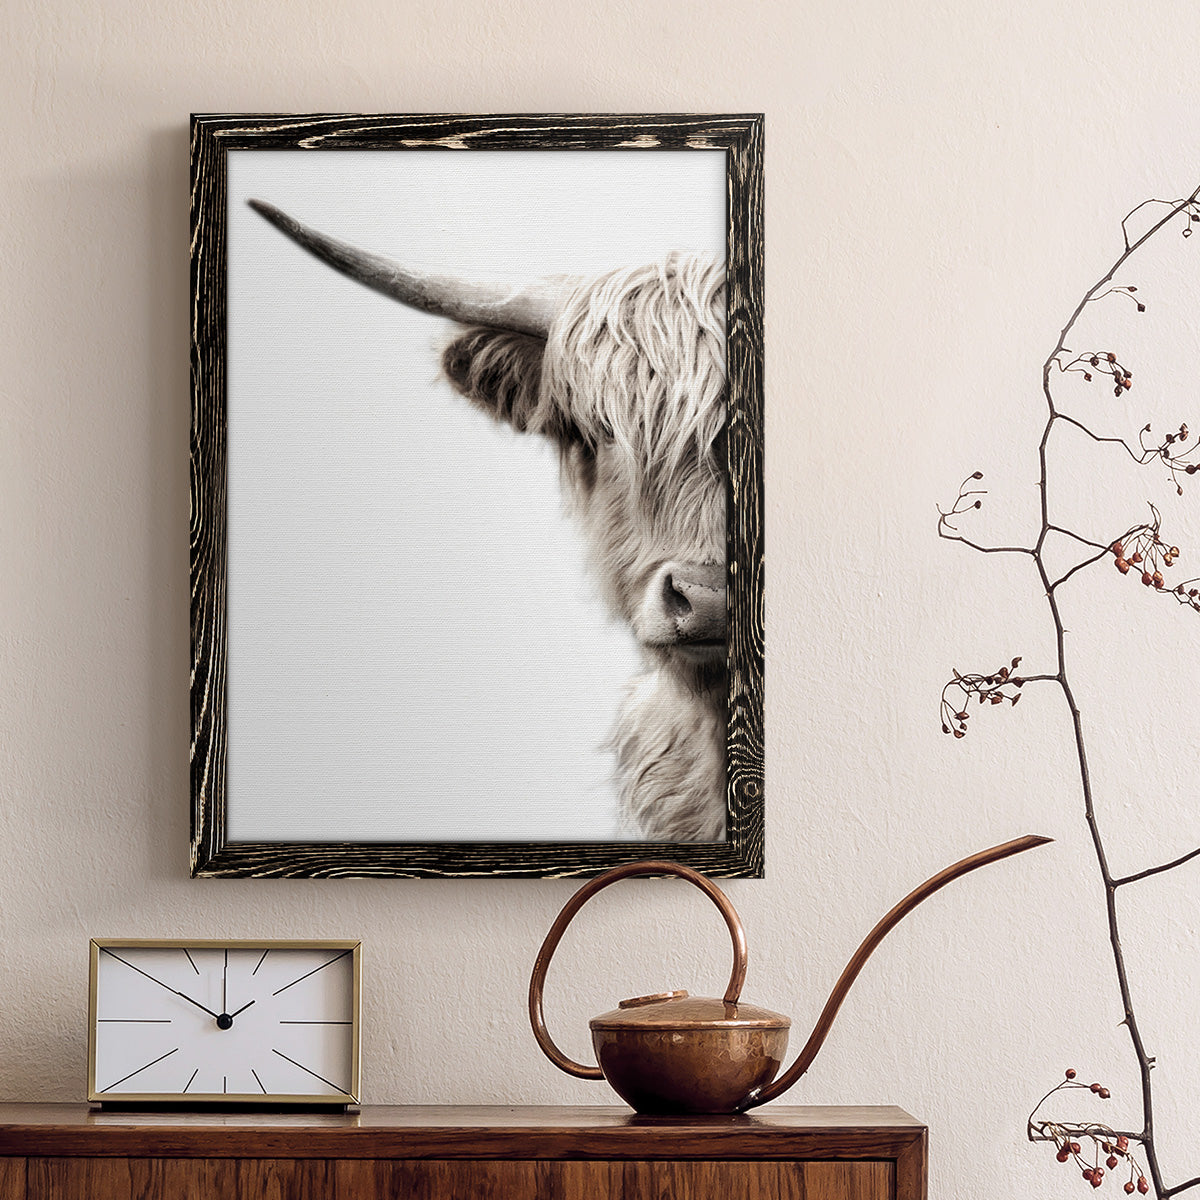 Highland Cattle - Premium Canvas Framed in Barnwood - Ready to Hang